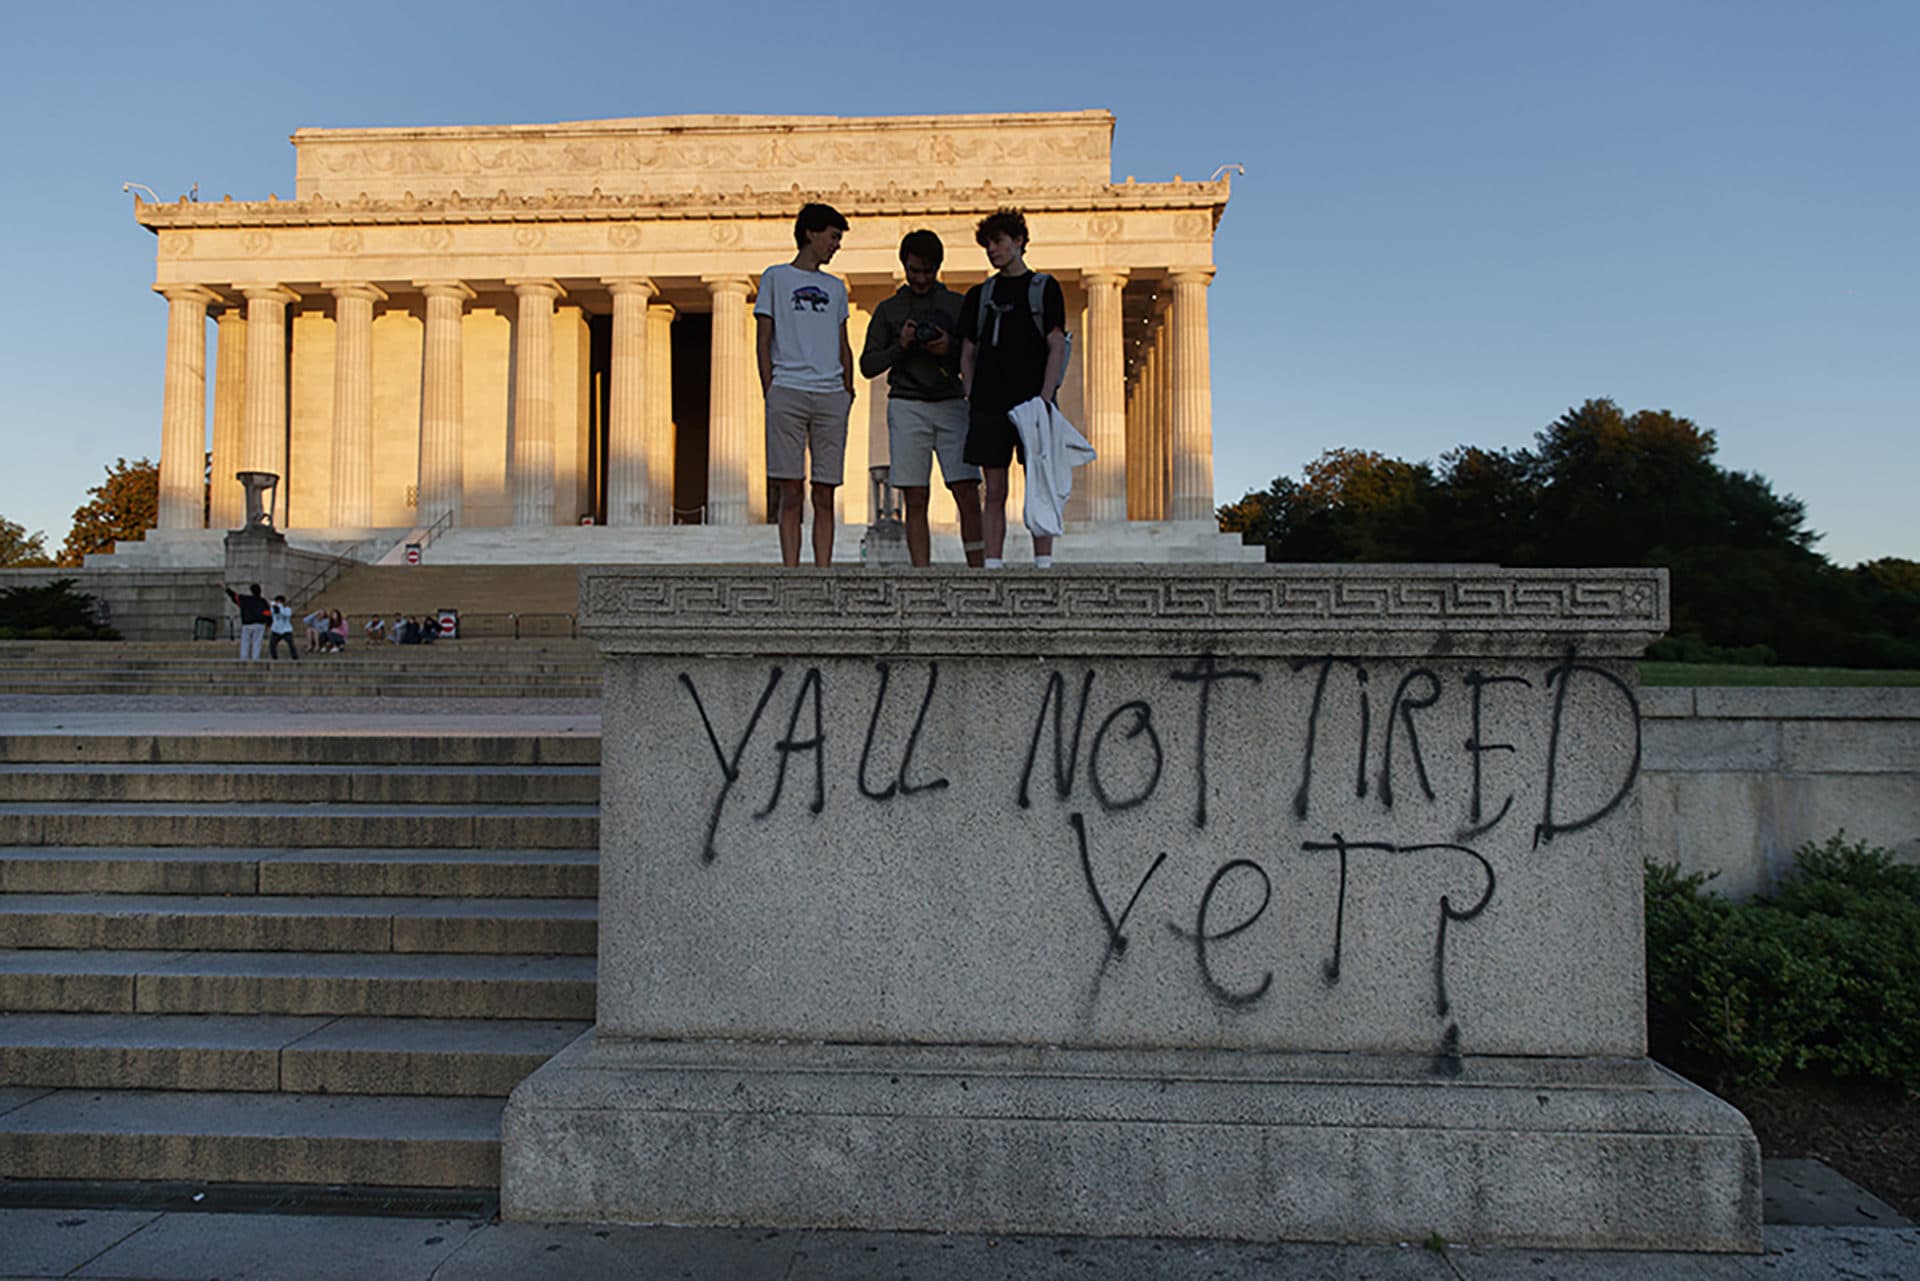 Spray paint that reads &quot;Yall Not Tired Yet?&quot; is seen on the base fo the Lincoln Memorial on the National Mall in Washington, early Sunday, May 31, 2020, the morning after protests over the death of George Floyd. Floyd died after being restrained by Minneapolis police officers on Memorial Day. (AP Photo/Carolyn Kaster)